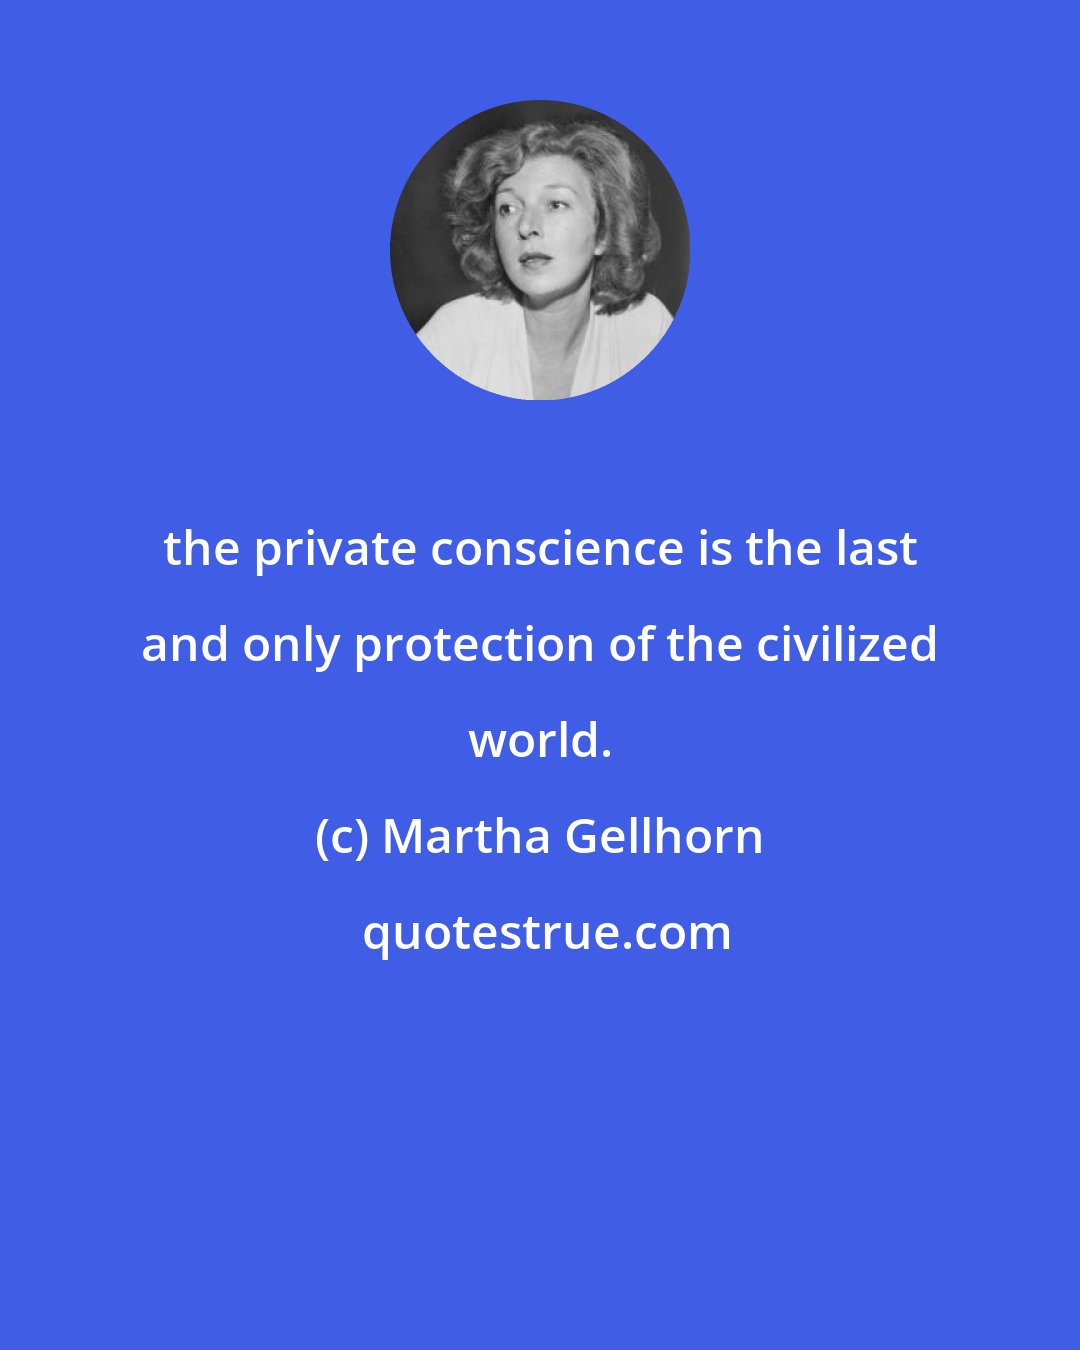 Martha Gellhorn: the private conscience is the last and only protection of the civilized world.